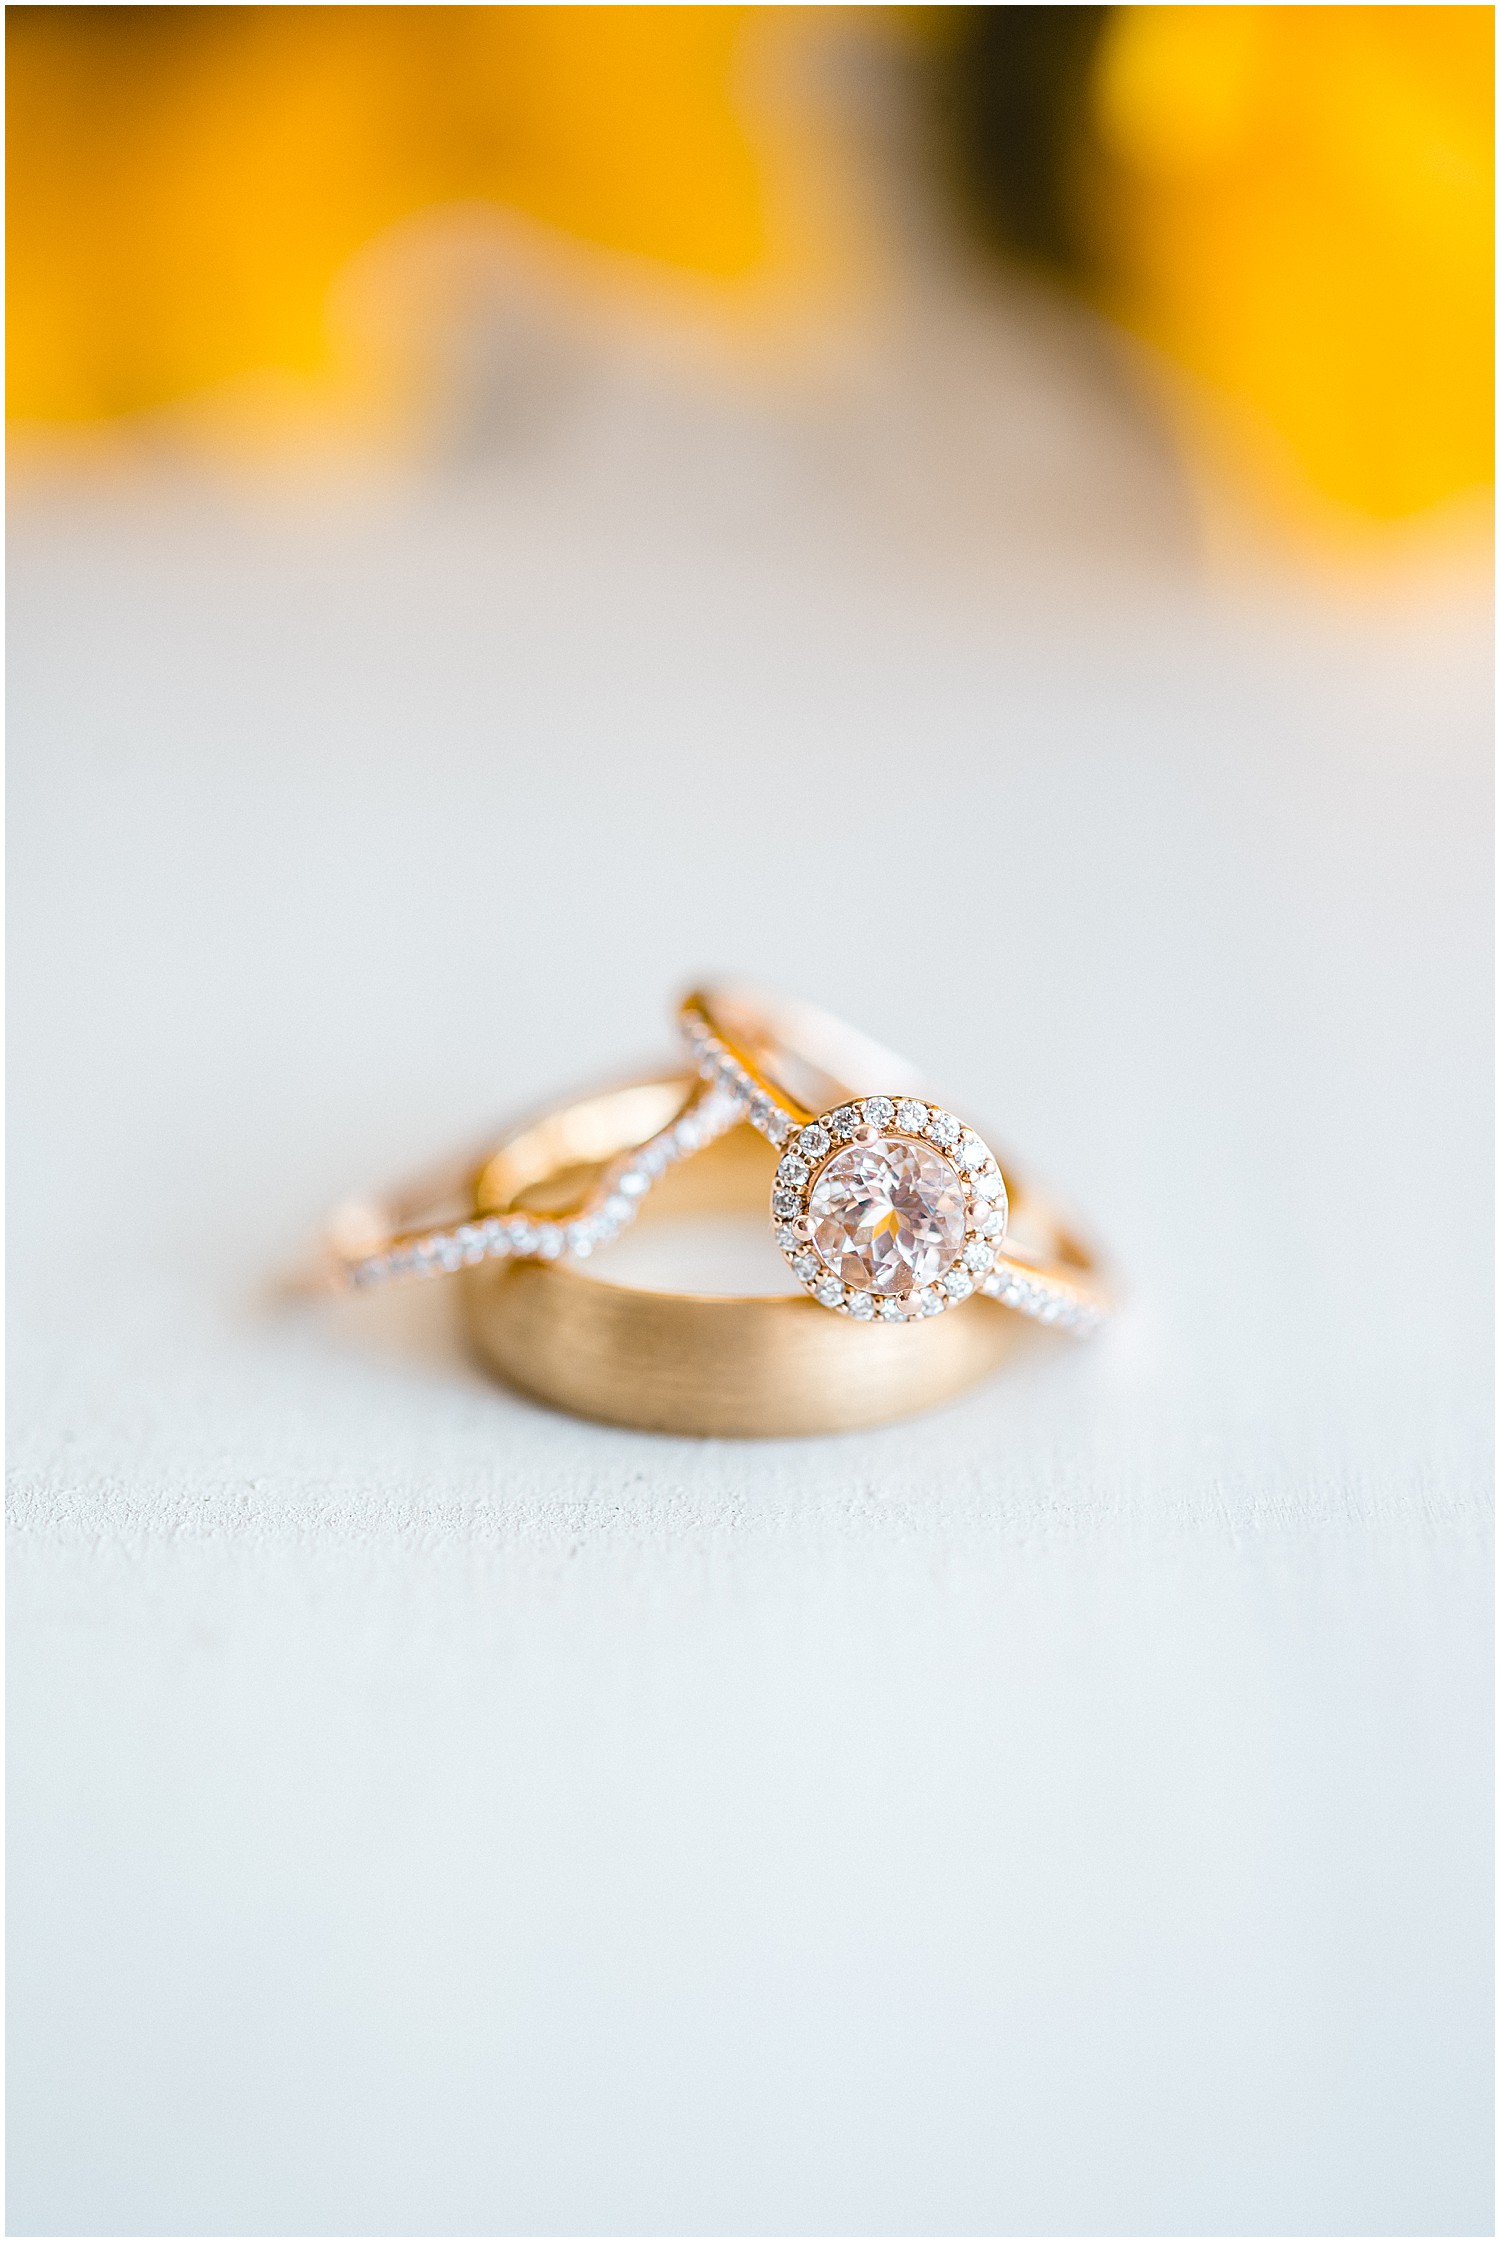 set of three gold and diamond wedding rings on white background in front of sunflower